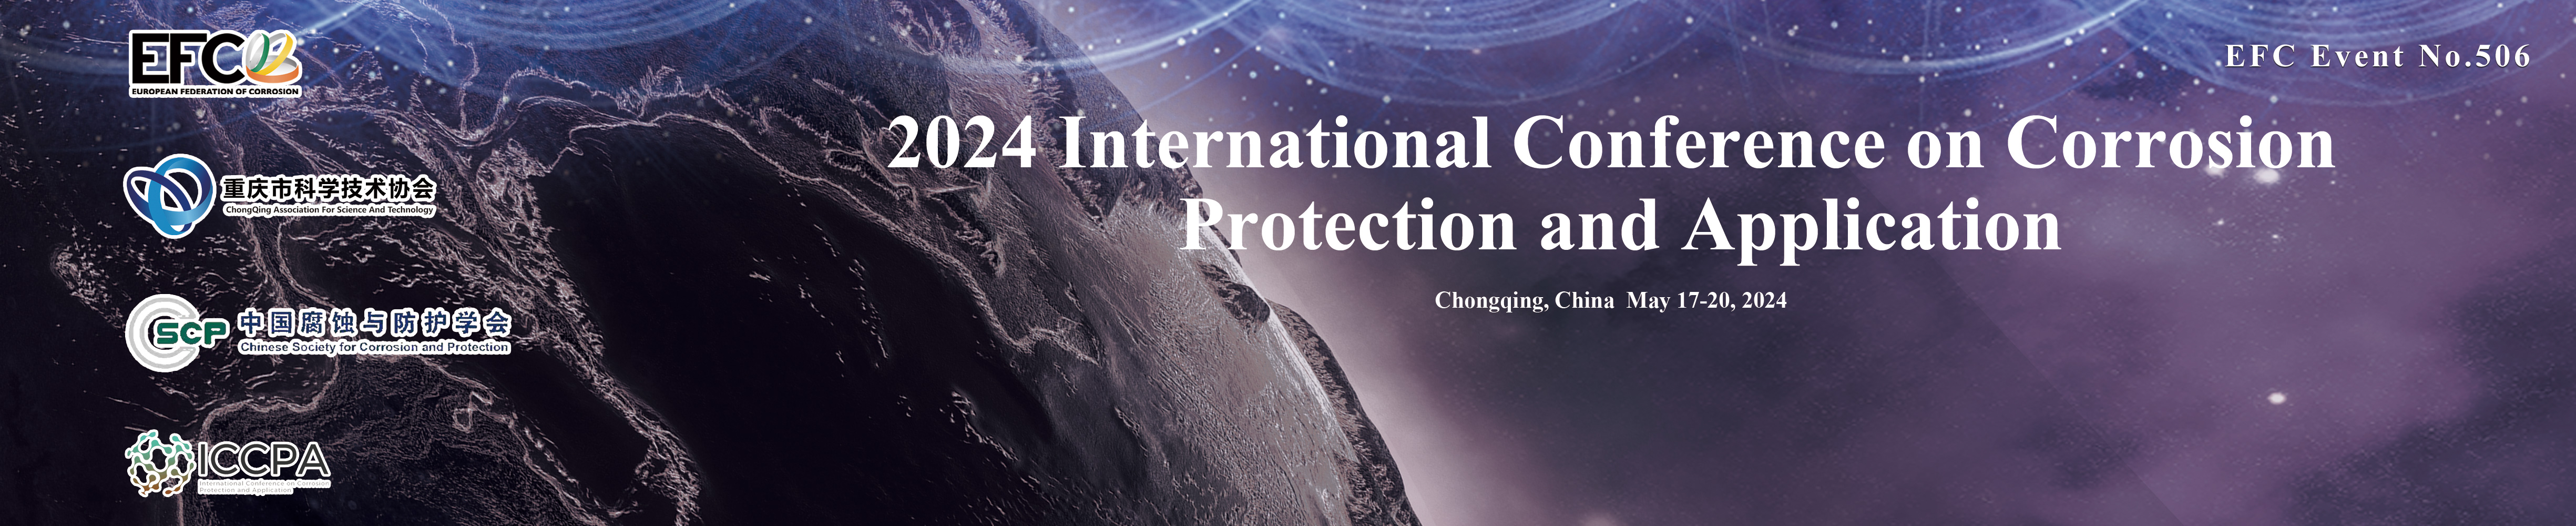 2024 International Conference on Corrosion Protection and Application（ICCPA2024）